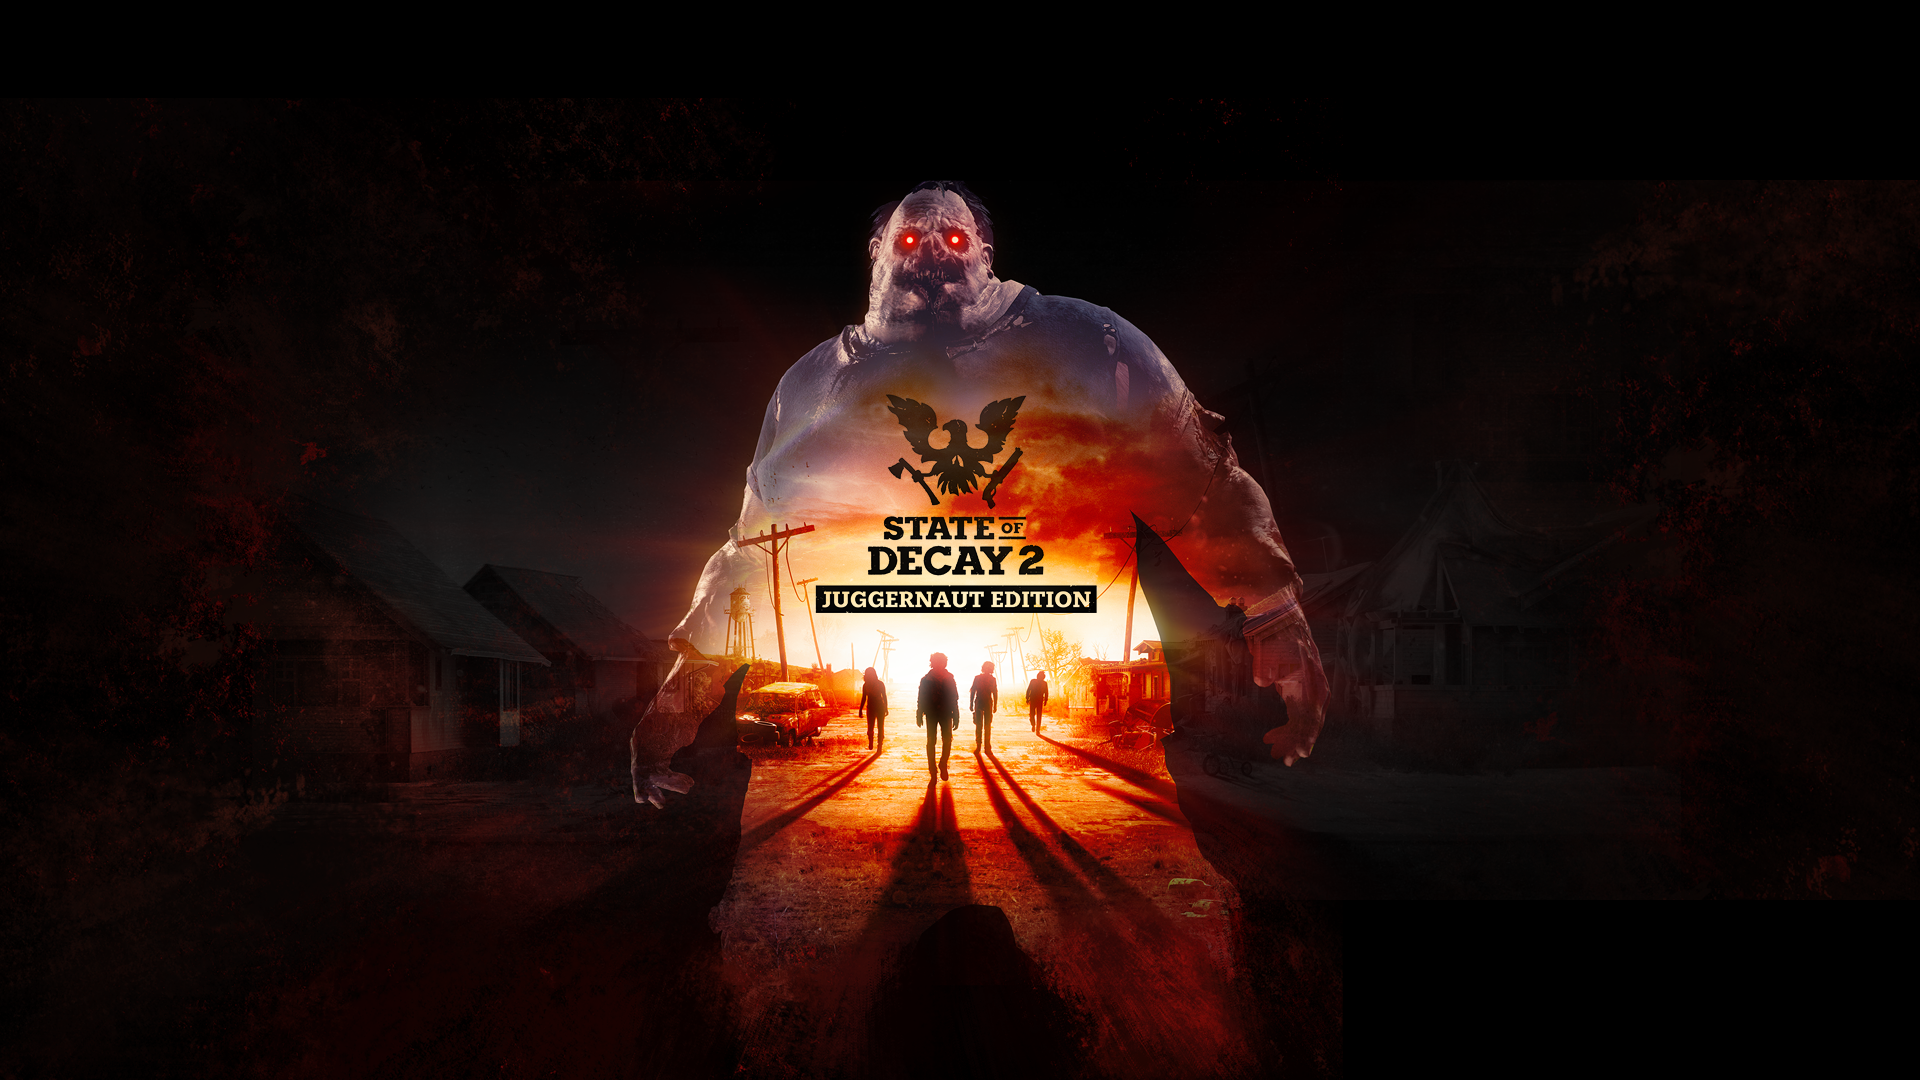 Is State of Decay 2 Cross-platform?